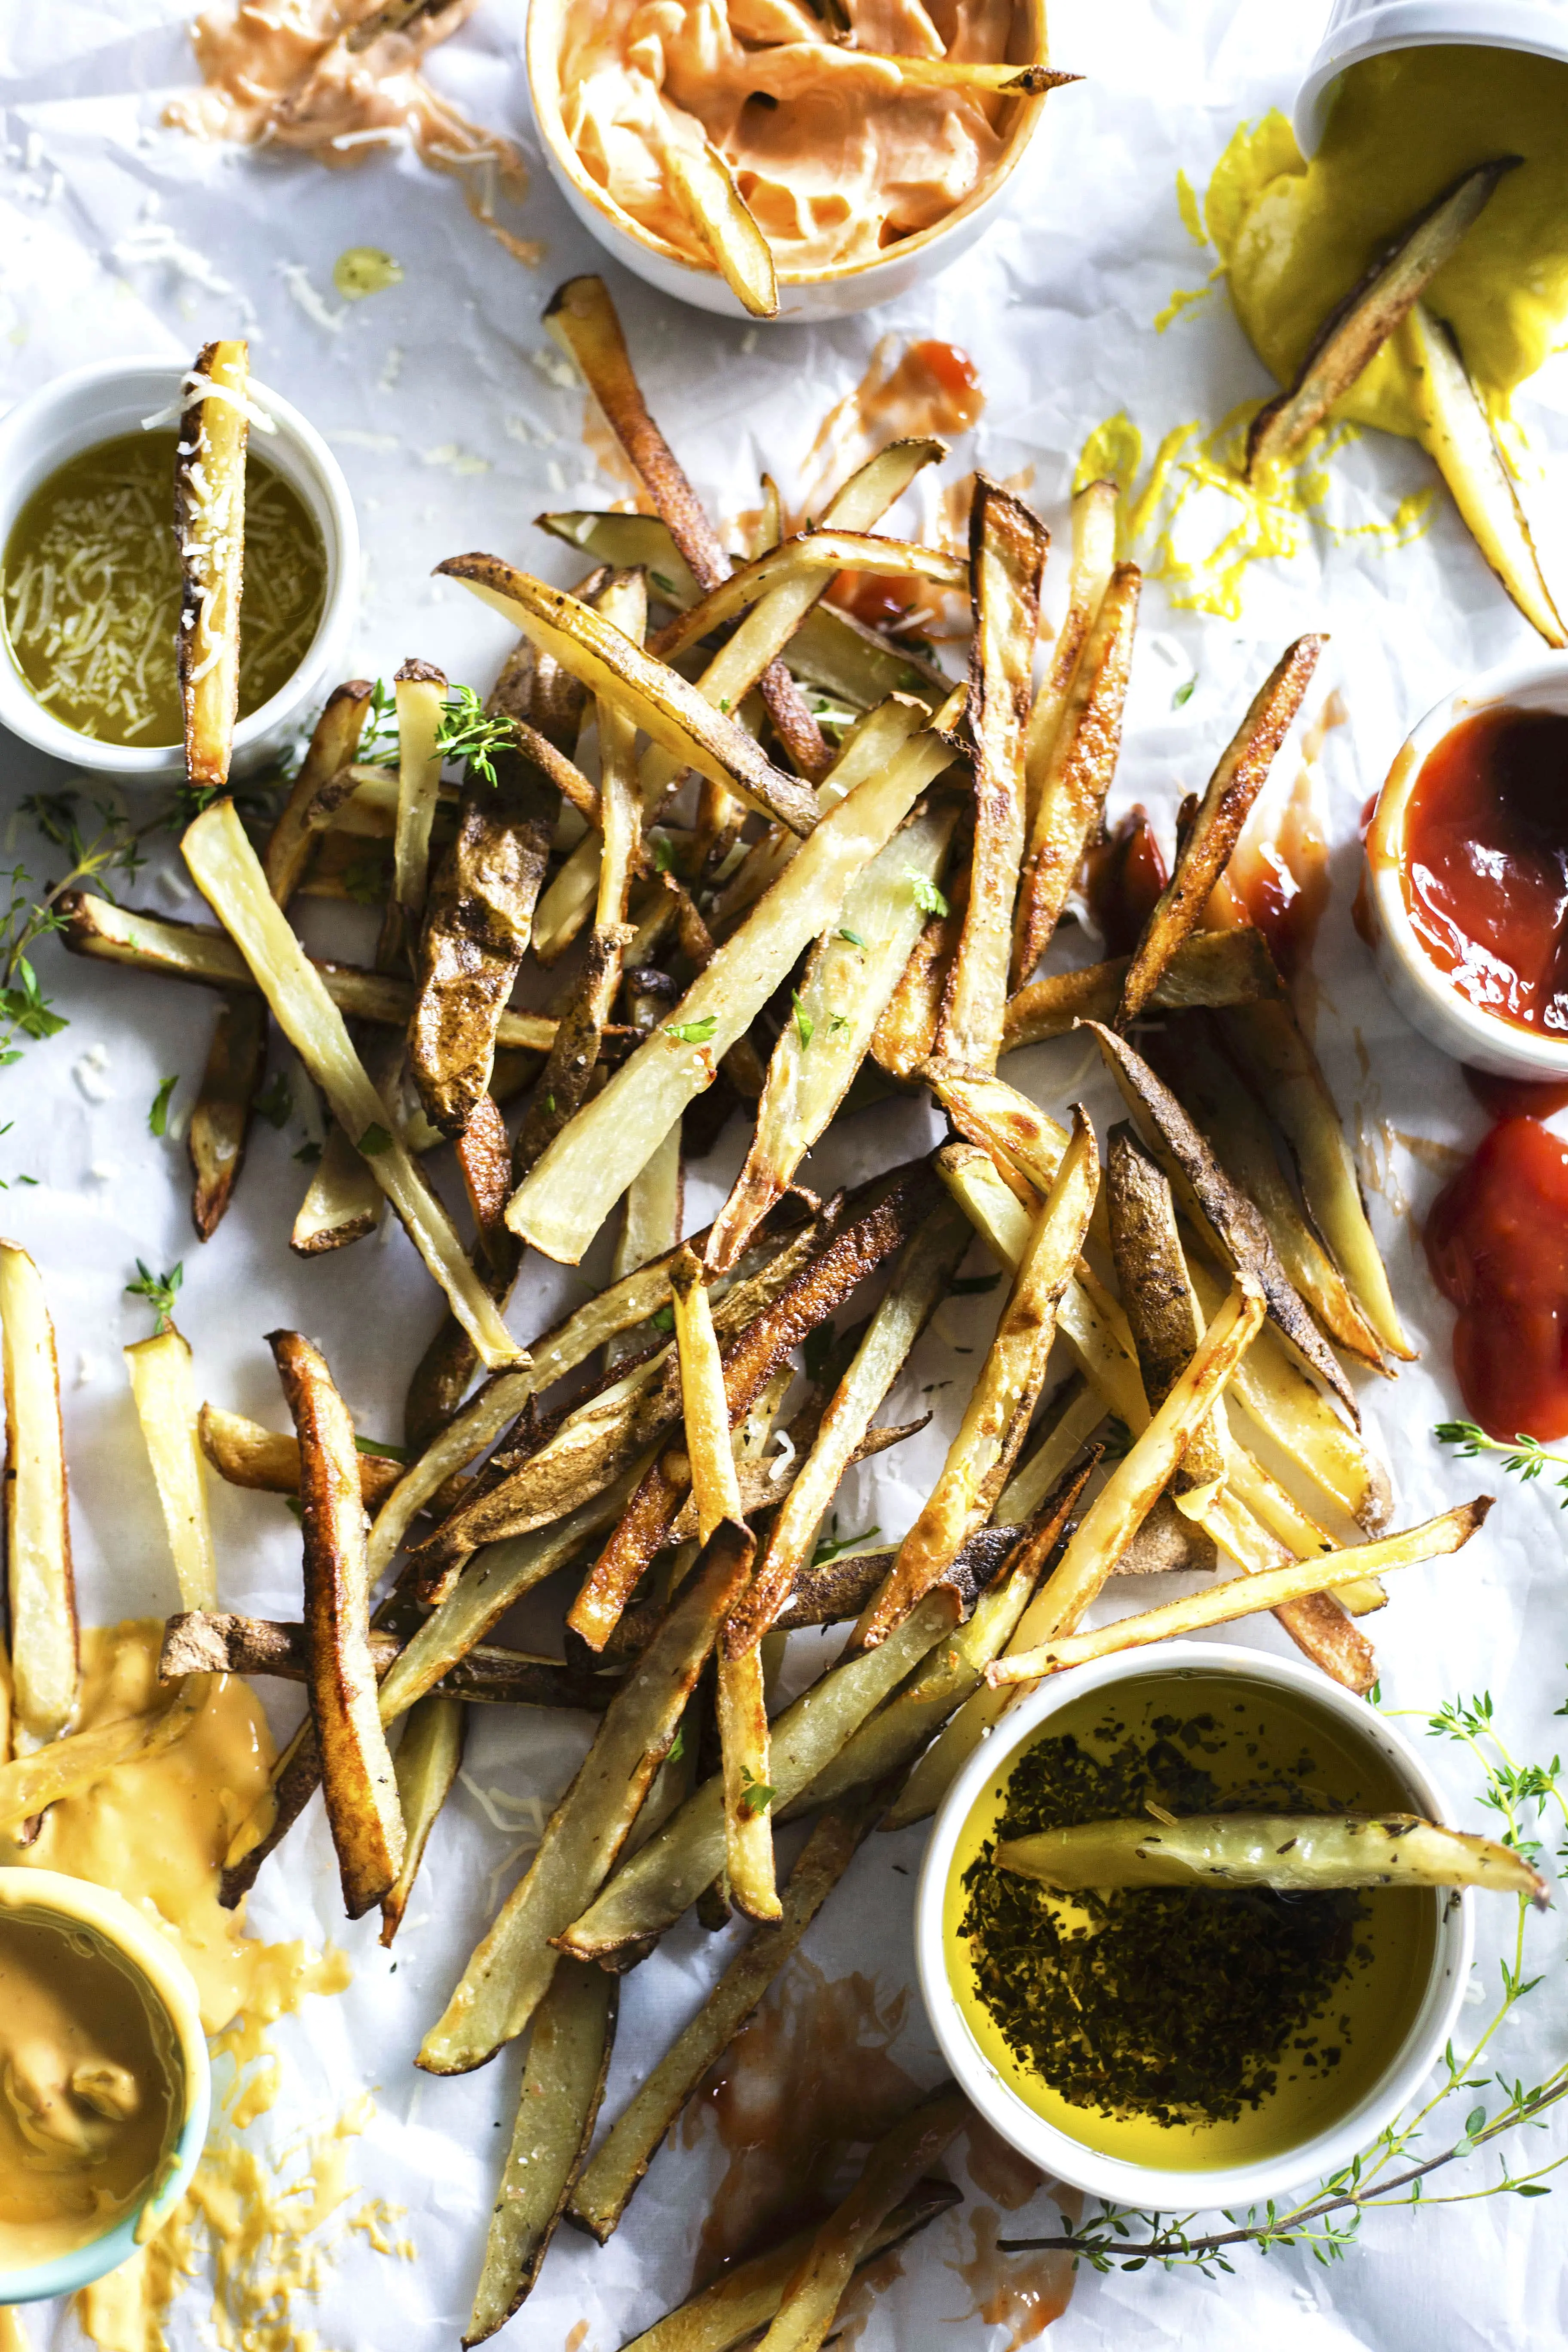 French Fry Bar | Build the ultimate french fry bar with your choice of condiments and homemade, baked fries!